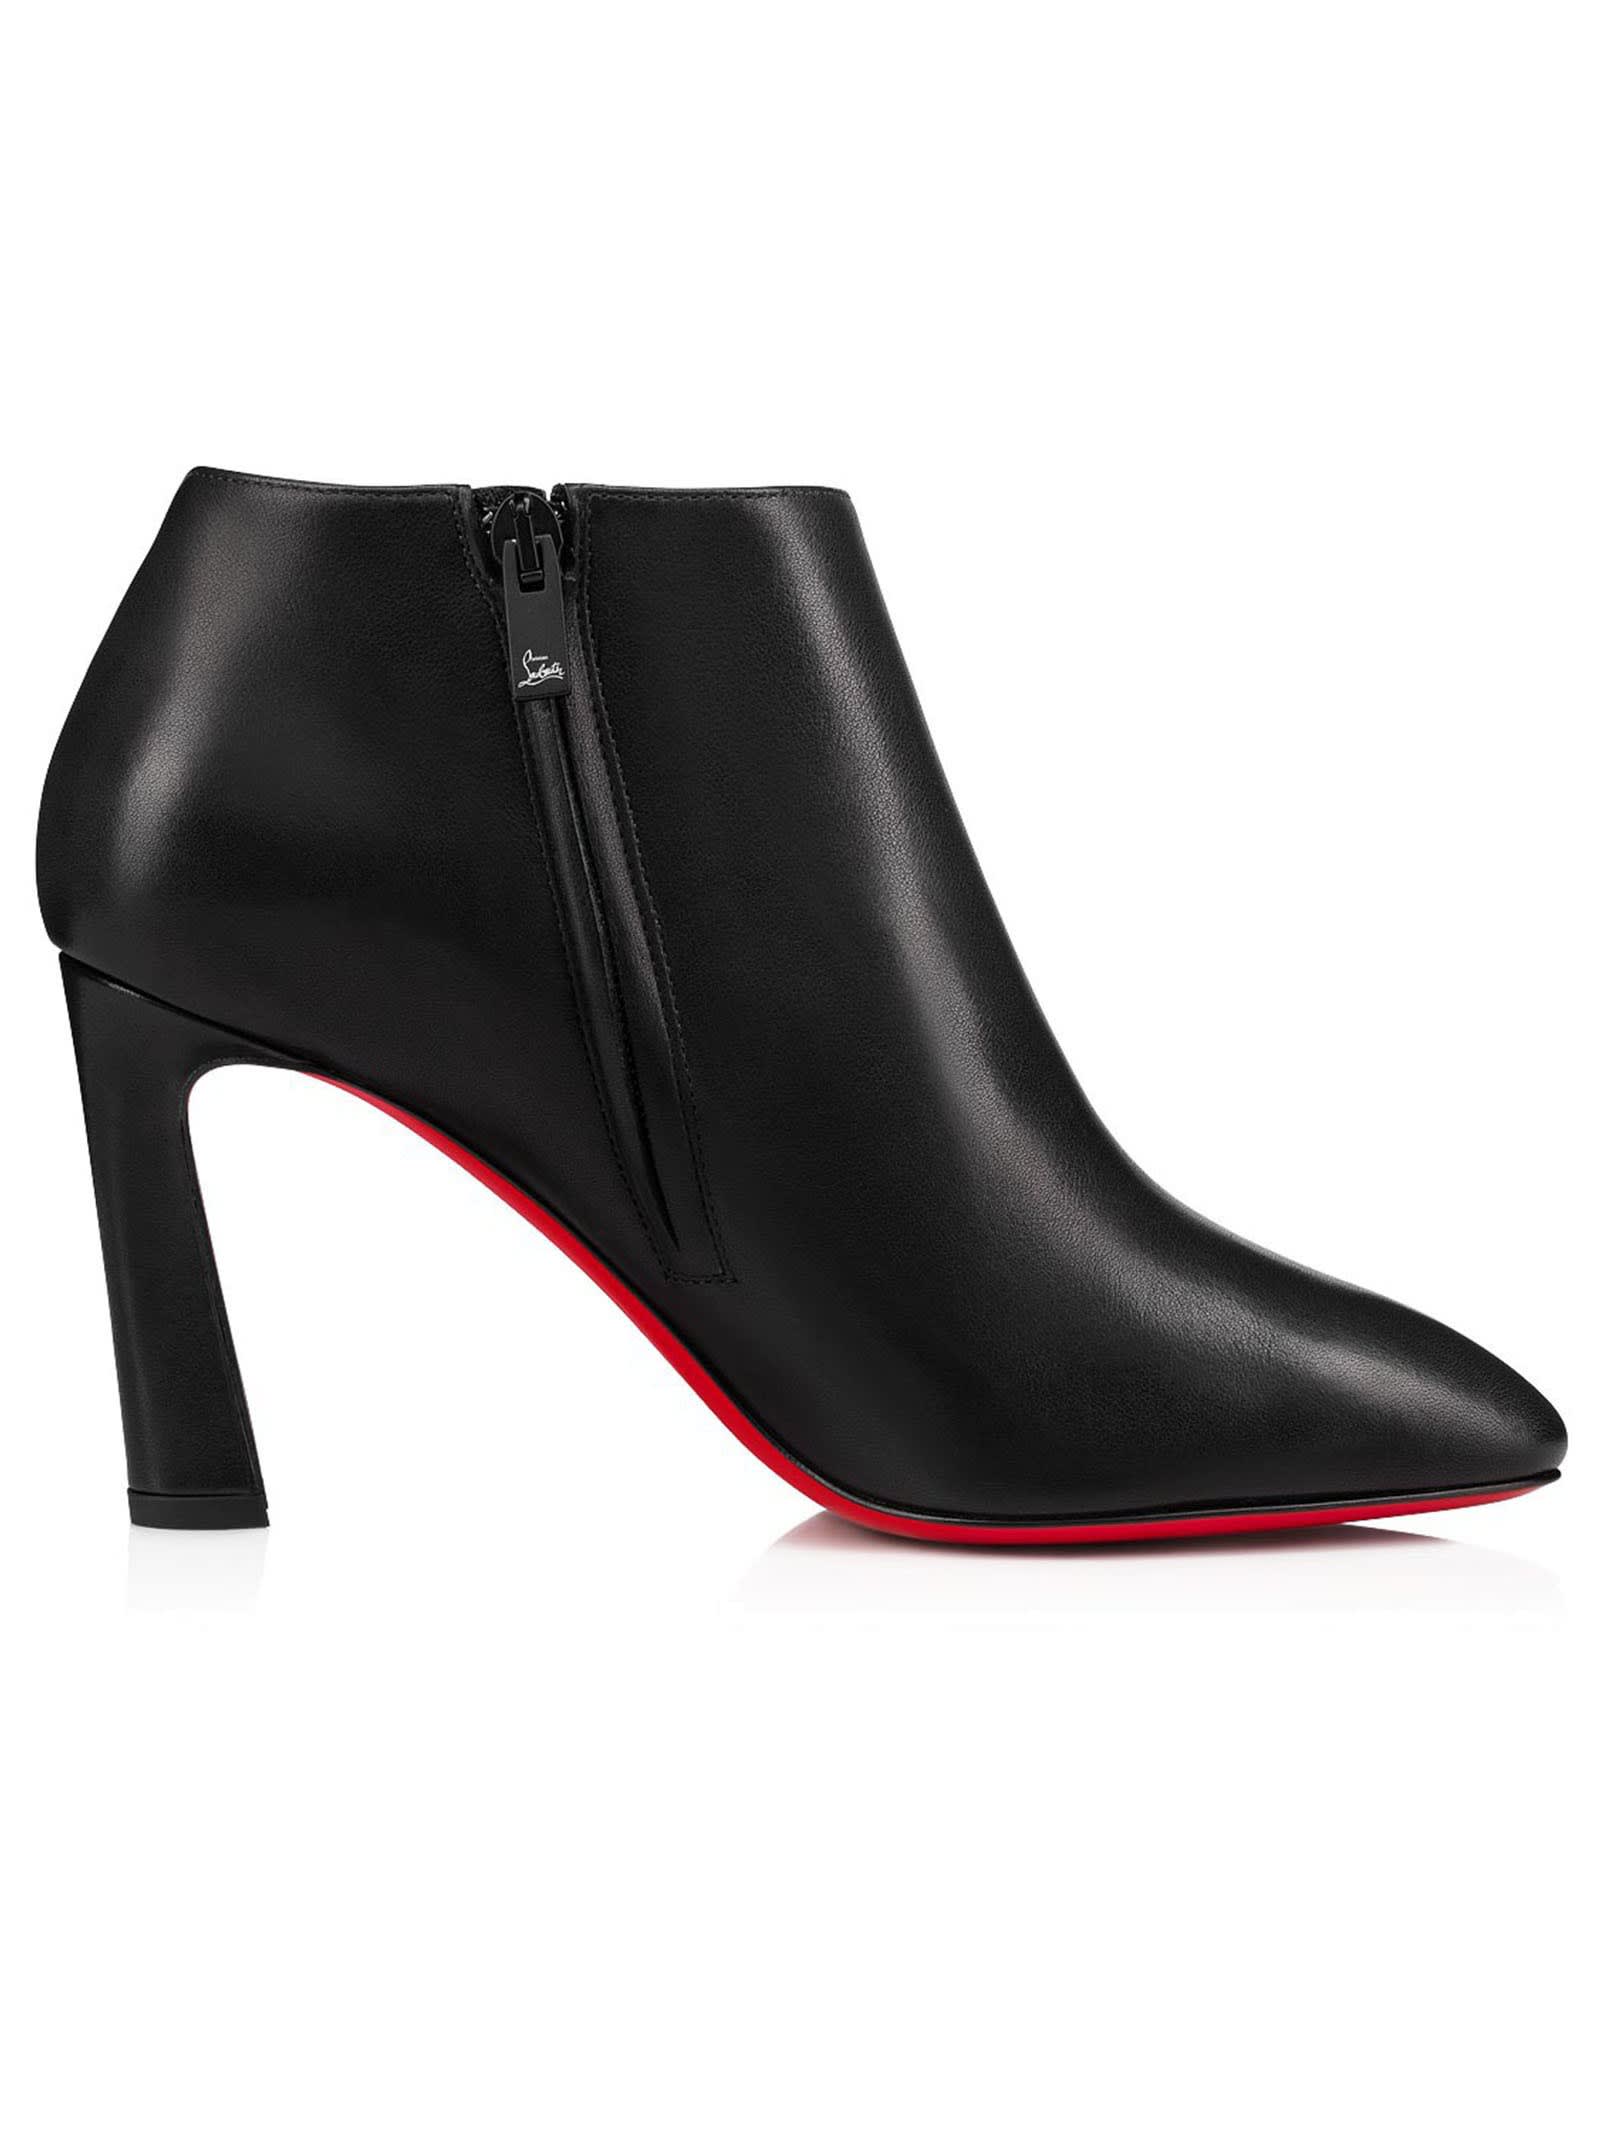 Buy Christian Louboutin Black Leather Eleonor 85 Ankle Boots online, shop Christian Louboutin shoes with free shipping